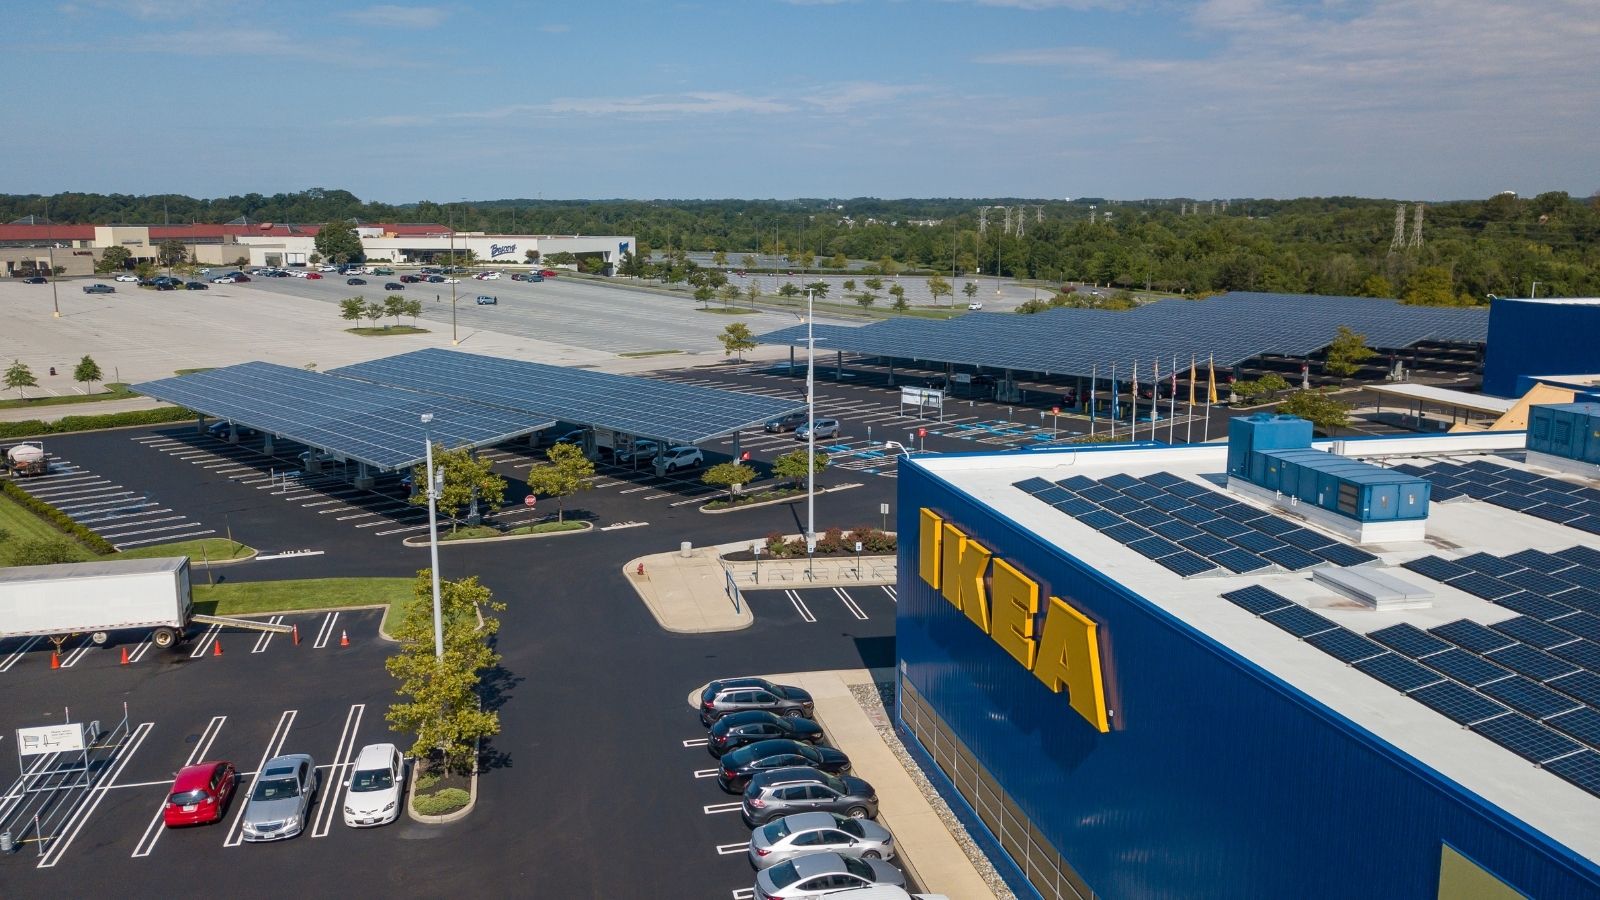 Baltimore IKEA with solar panels